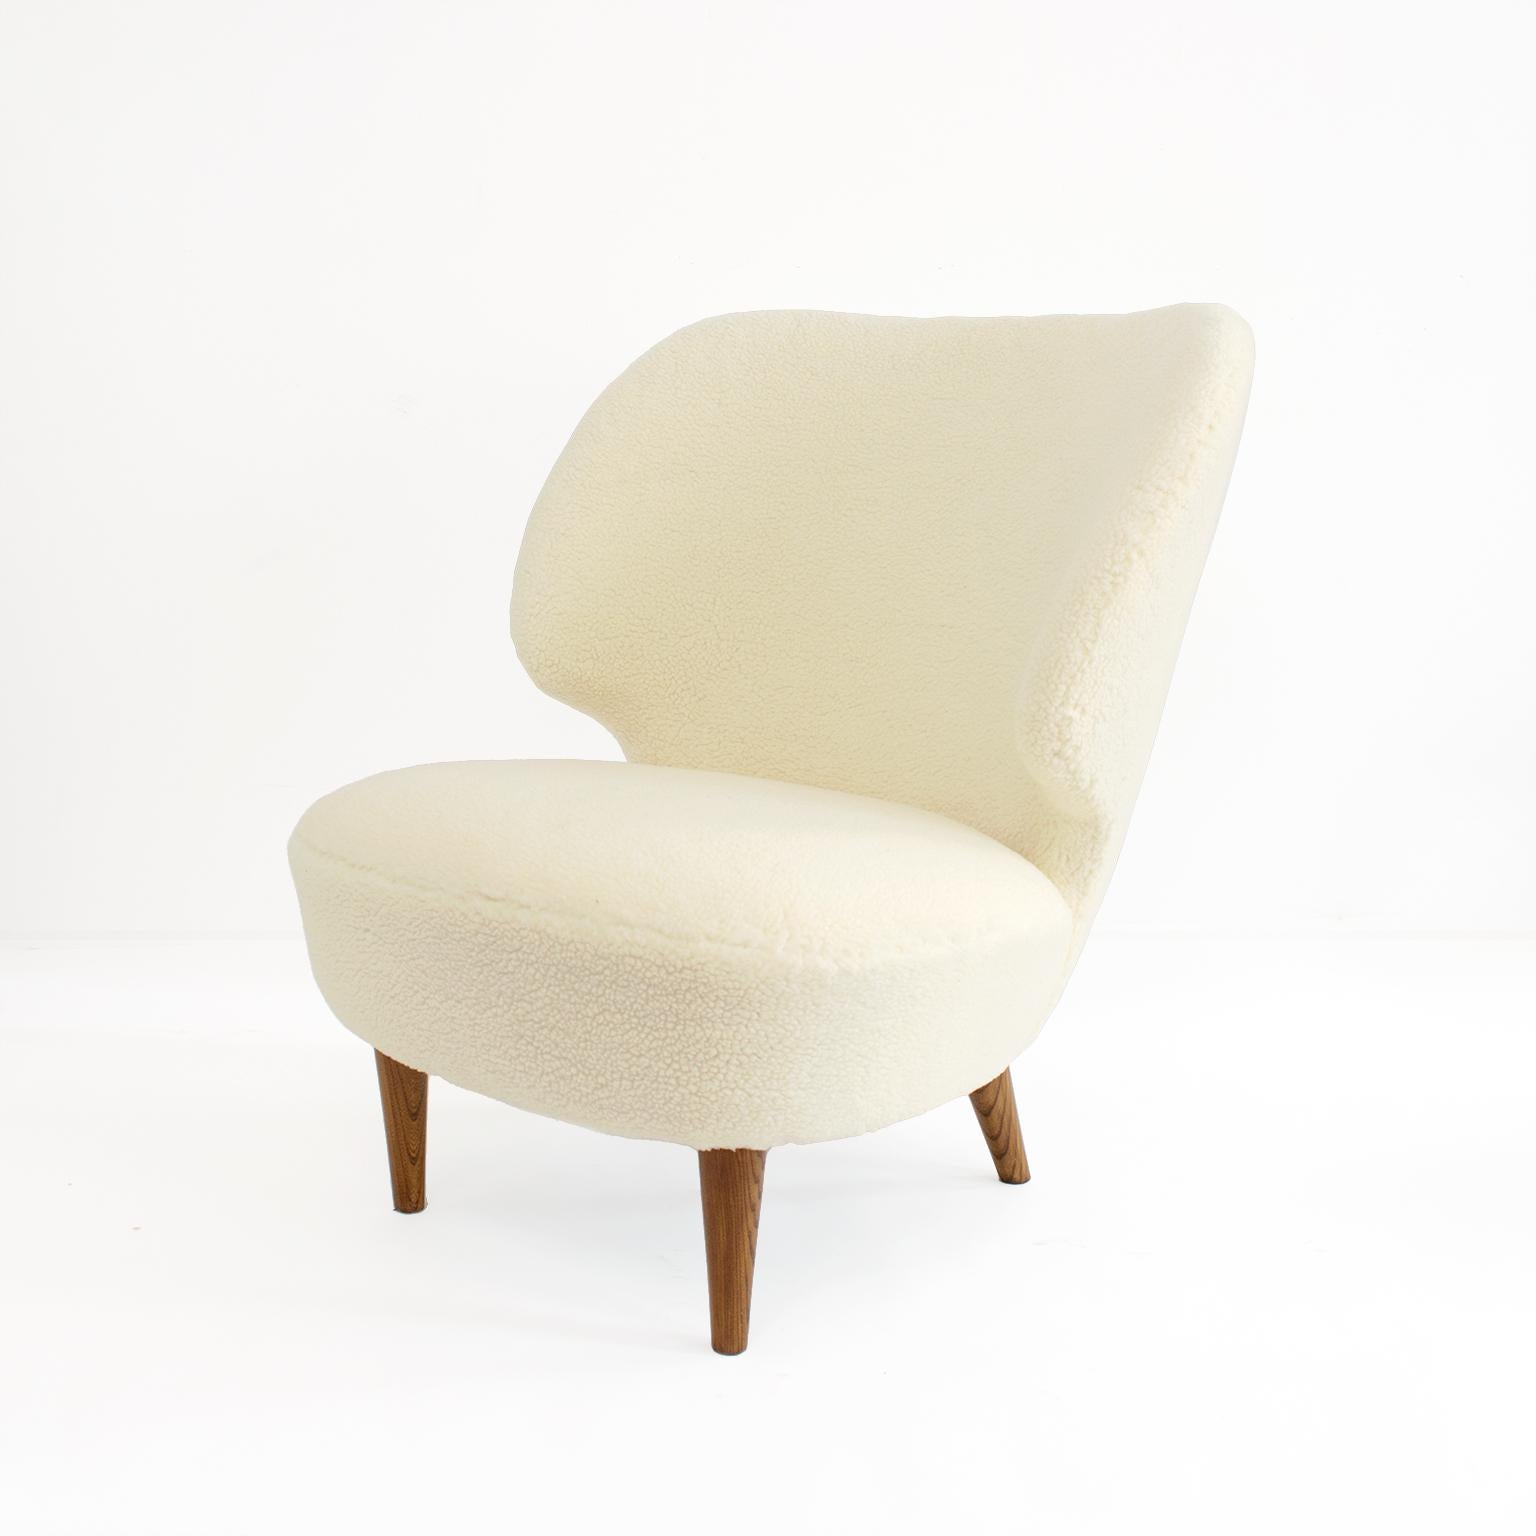 Sven Staaf’s 1940s wingback lounge chair upholstered in faux sheepskin upholstery. The chair’s broad backrest is comfortable and enveloping, the solid elm wood dowel legs are newly restored. Made by Almgren & Staaf, Sweden

Measures: Height: